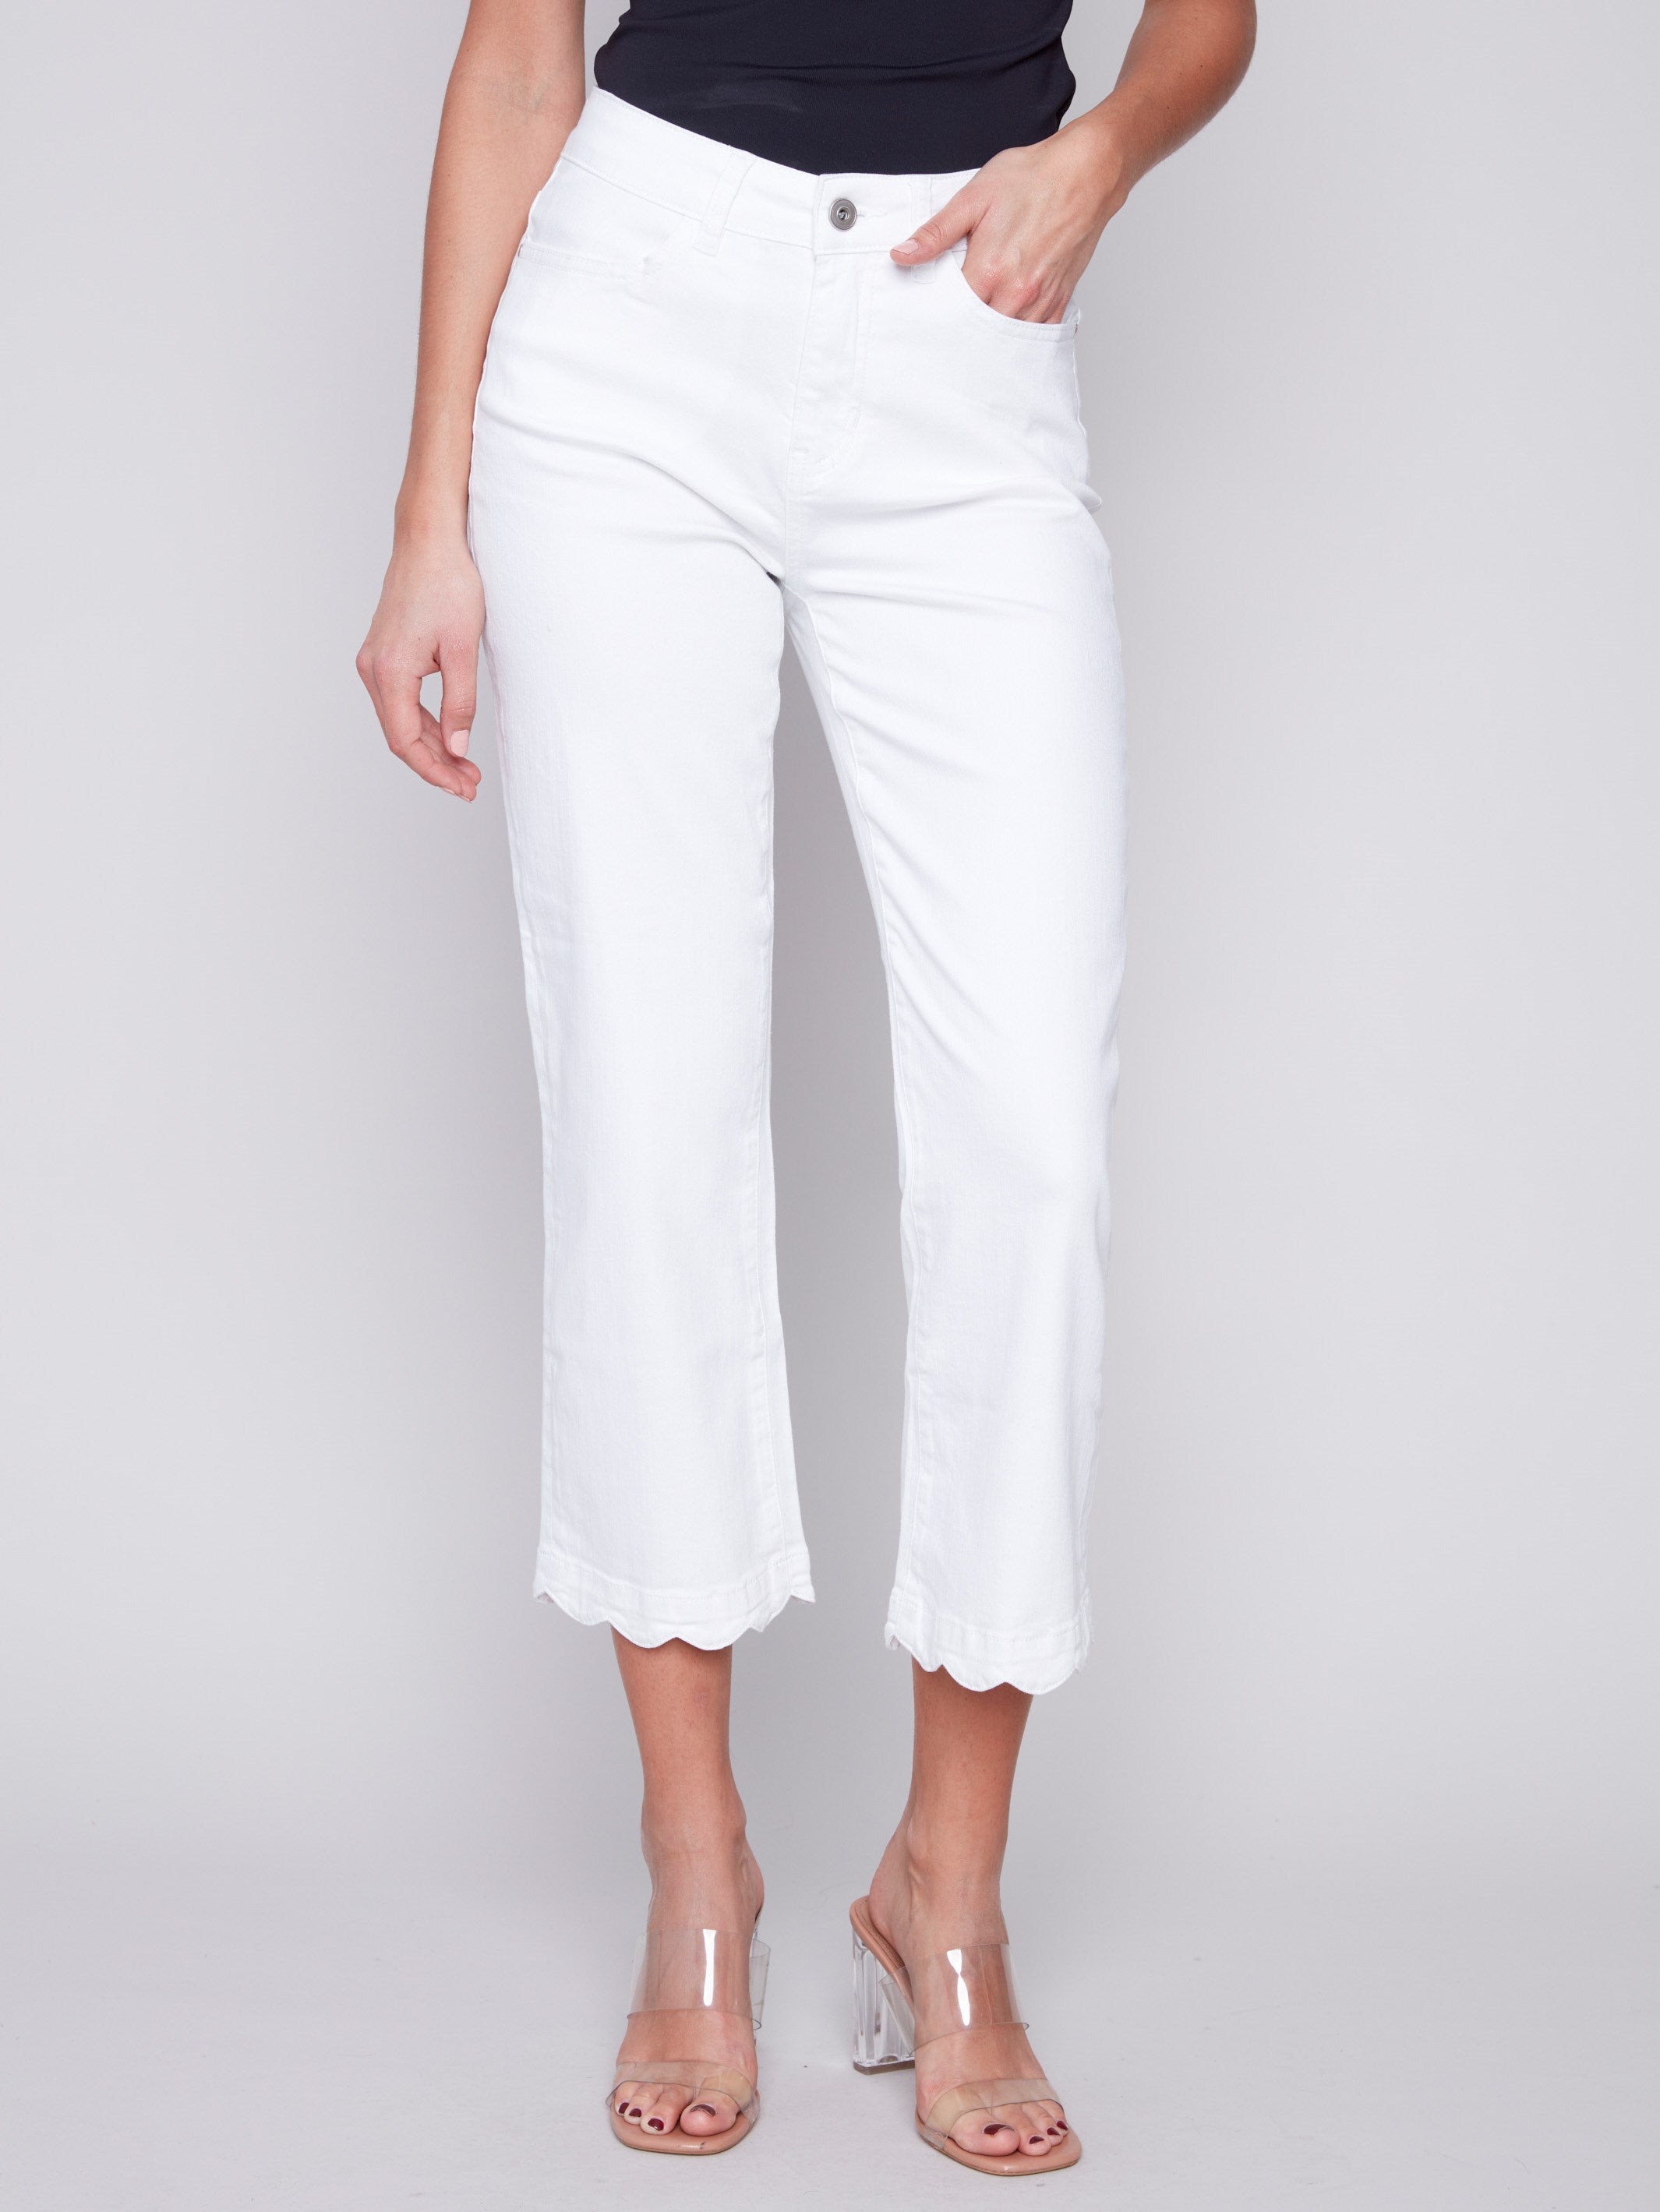 Charlie B Straight Leg Twill Jeans with Scallop Hem - White - Image 2